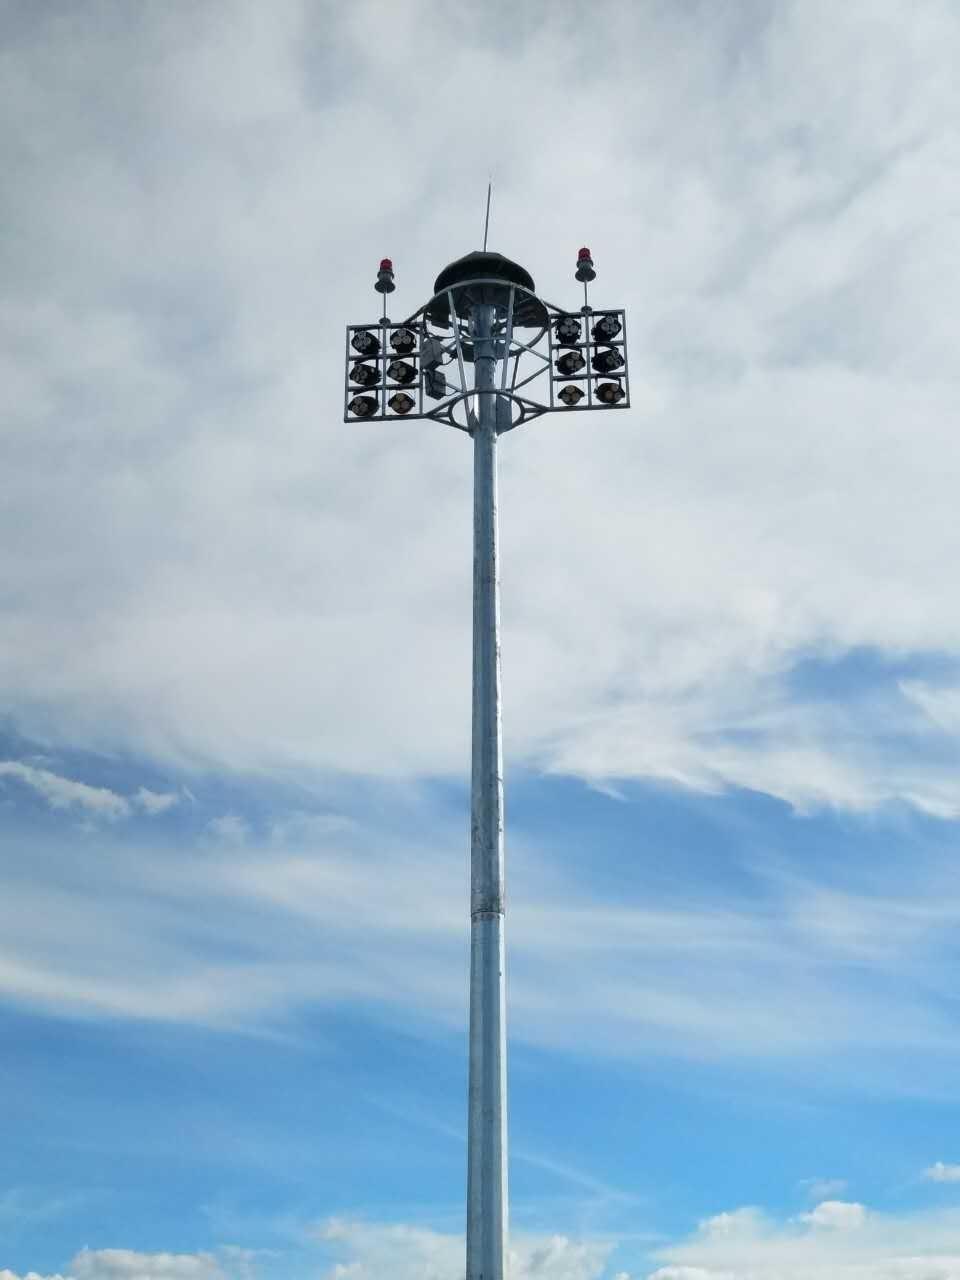 Price of 18m with 300W LED Flood High Mast Light Supplier